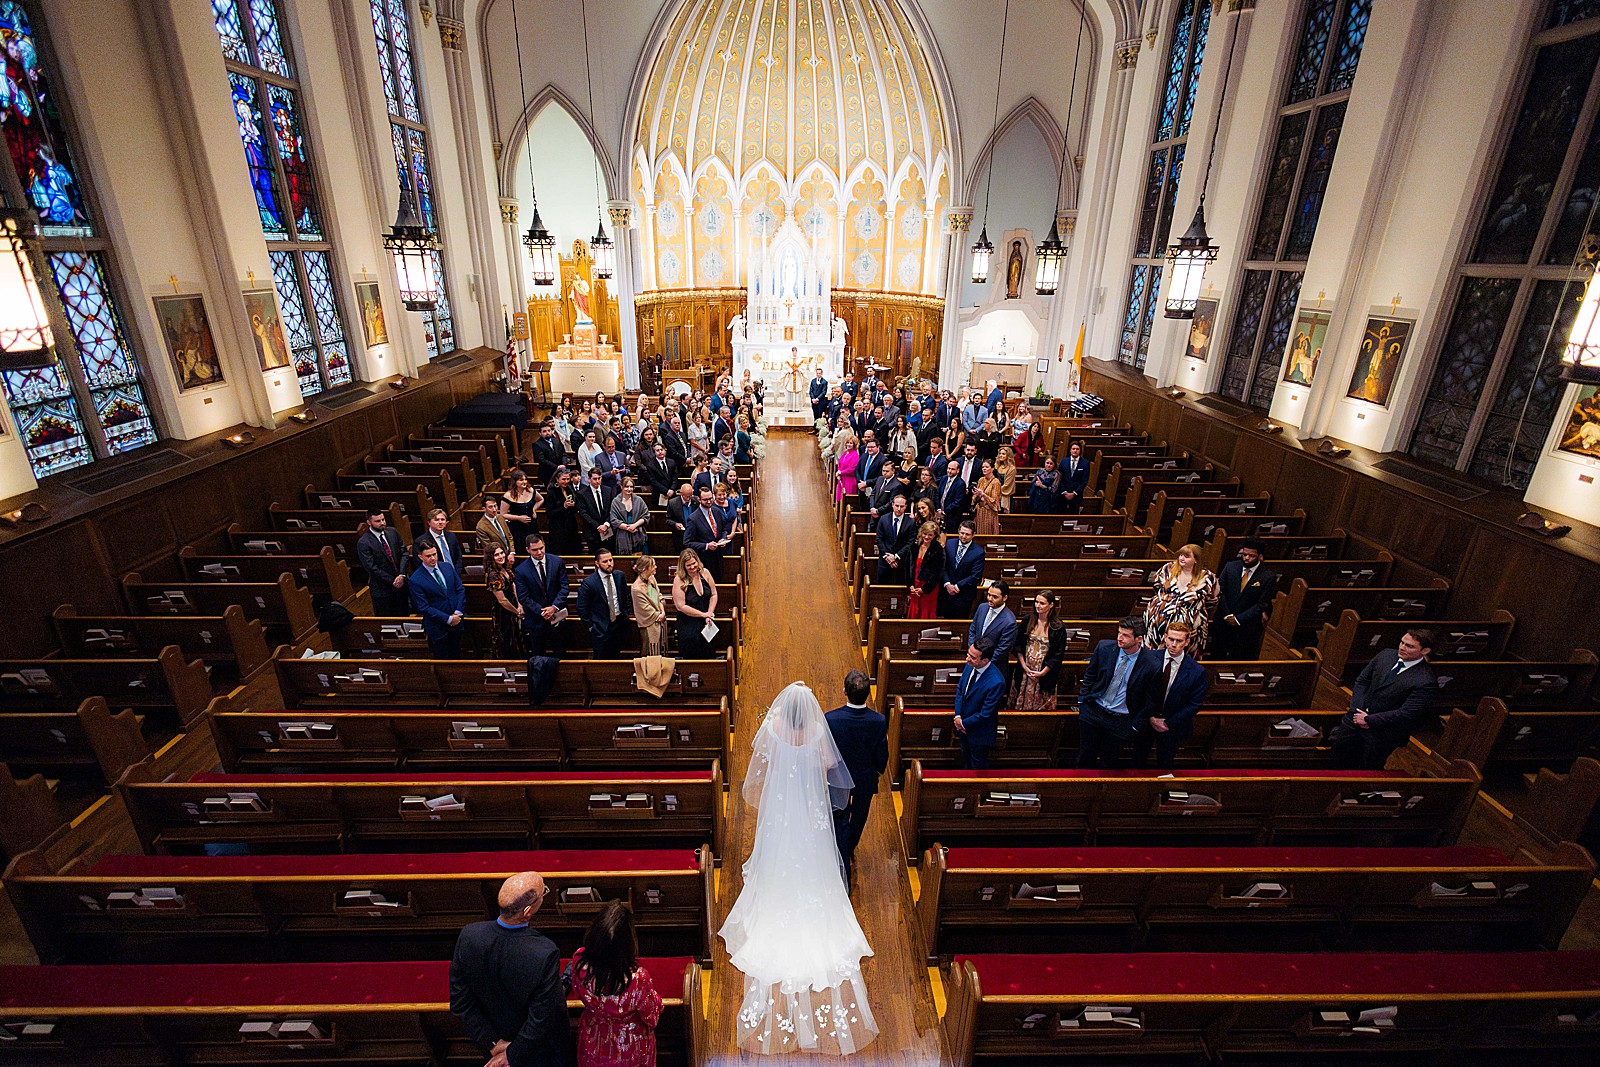 View from the balcony at Immaculate Conception church in DC as bride is walked down the aisle by her father.